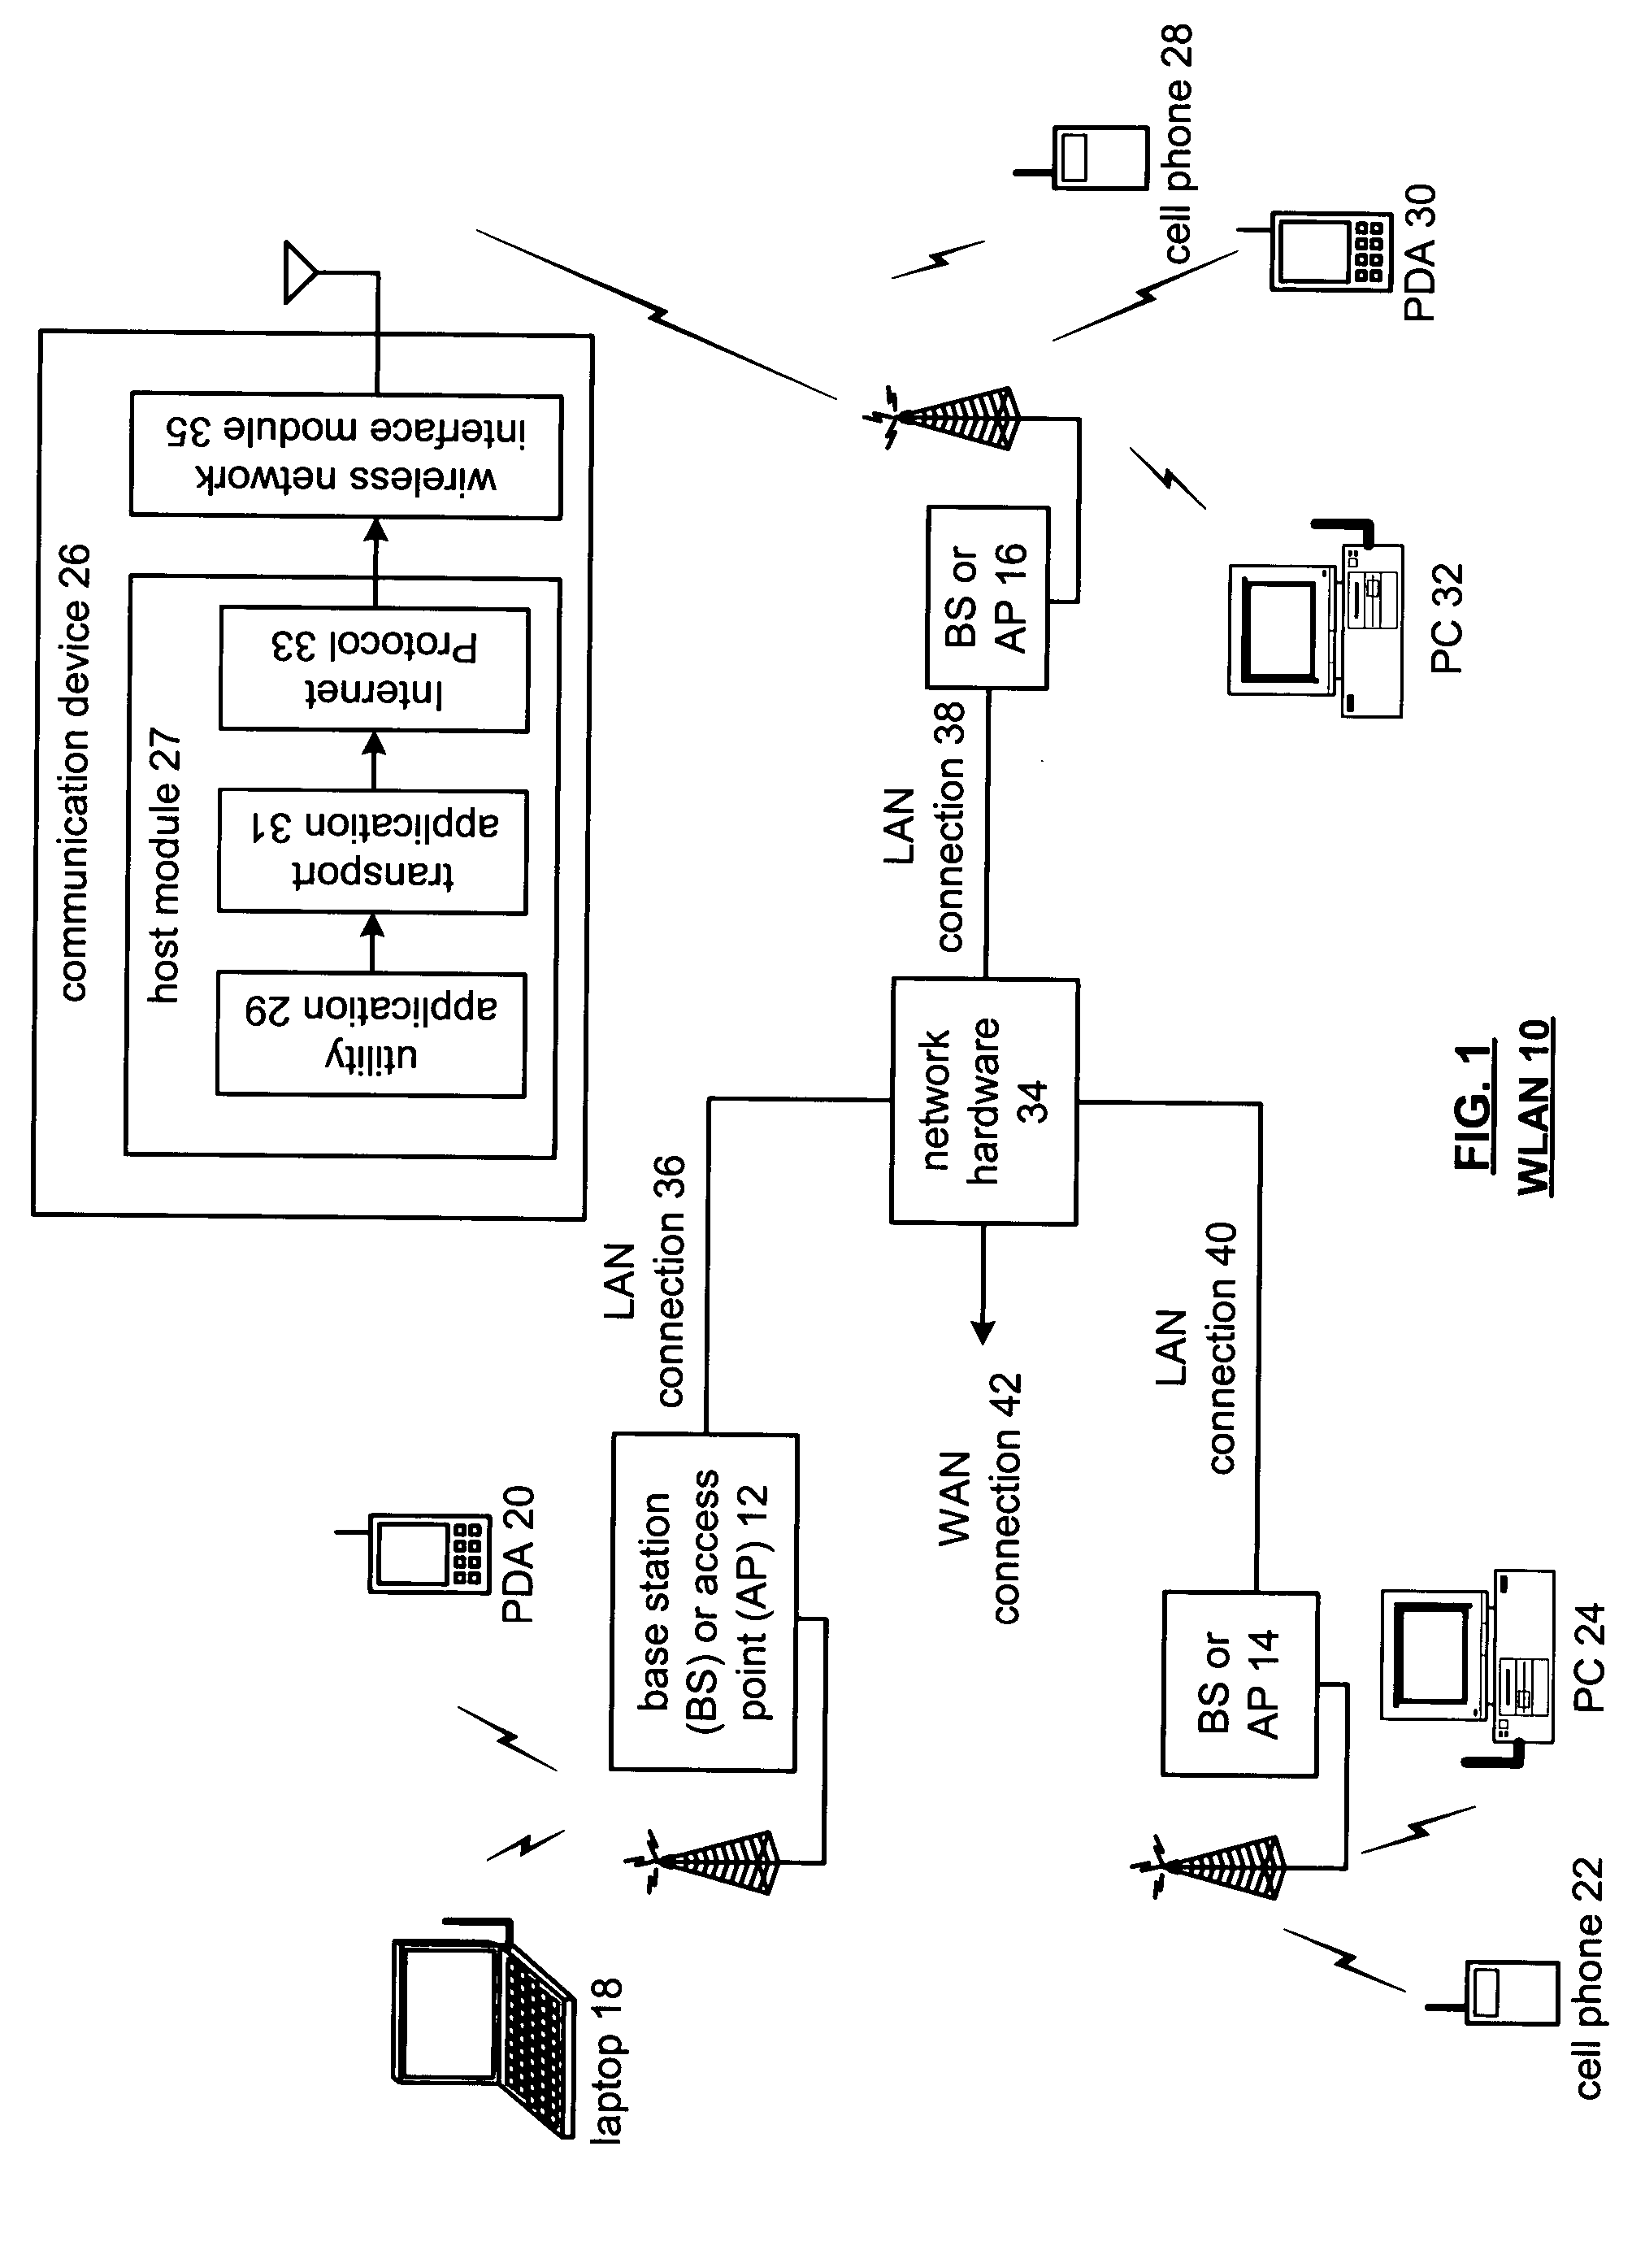 Interoperability of a network interface protocol with an internet interface protocol